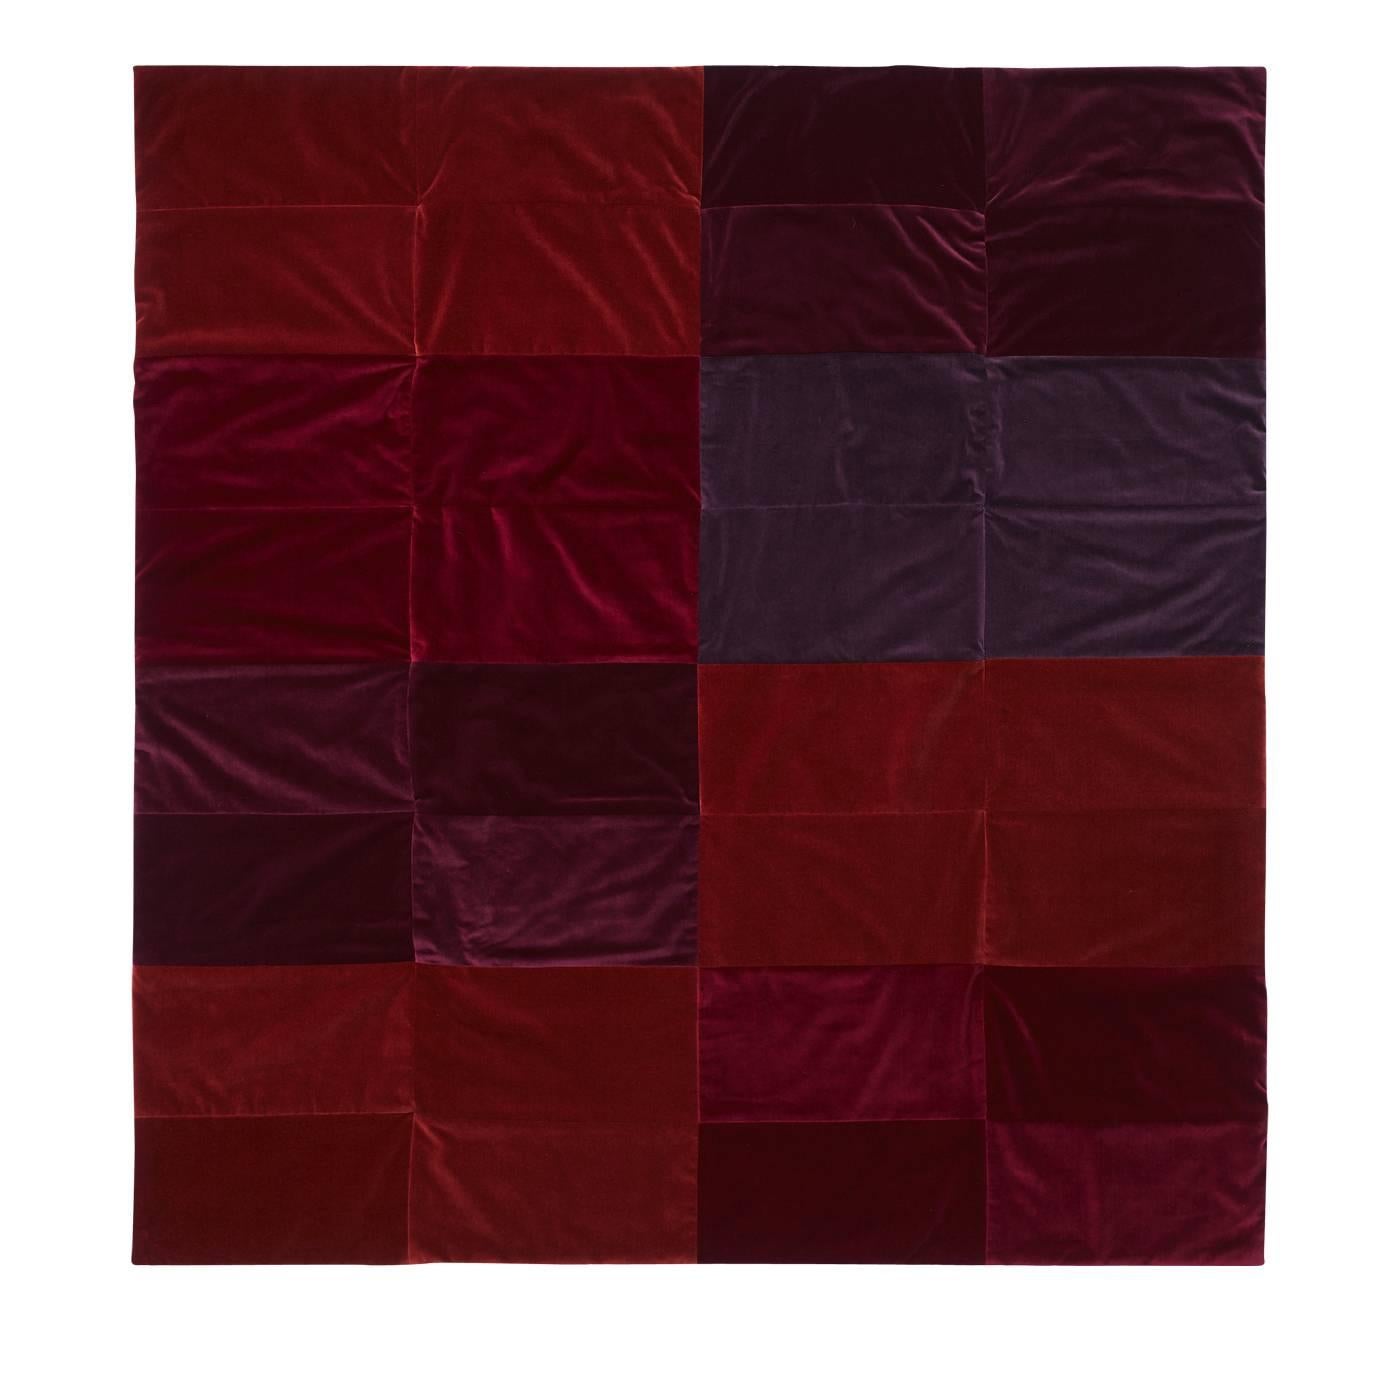 A Composition in Red Throw